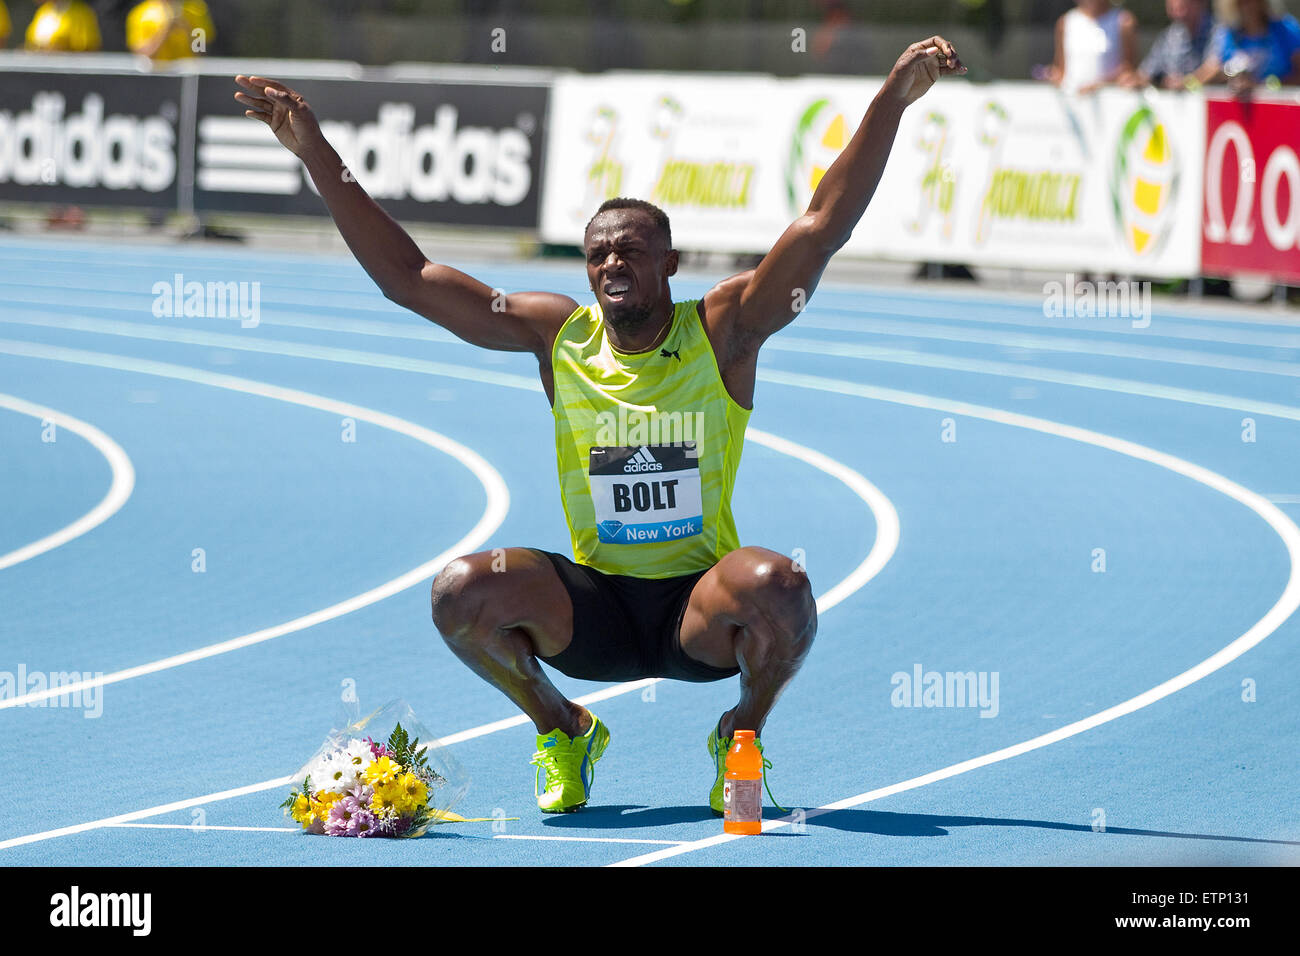 June 13, 2015; Randall's Island, NY, USA; Usain Bolt of Jamaica after  winning the men's 200m